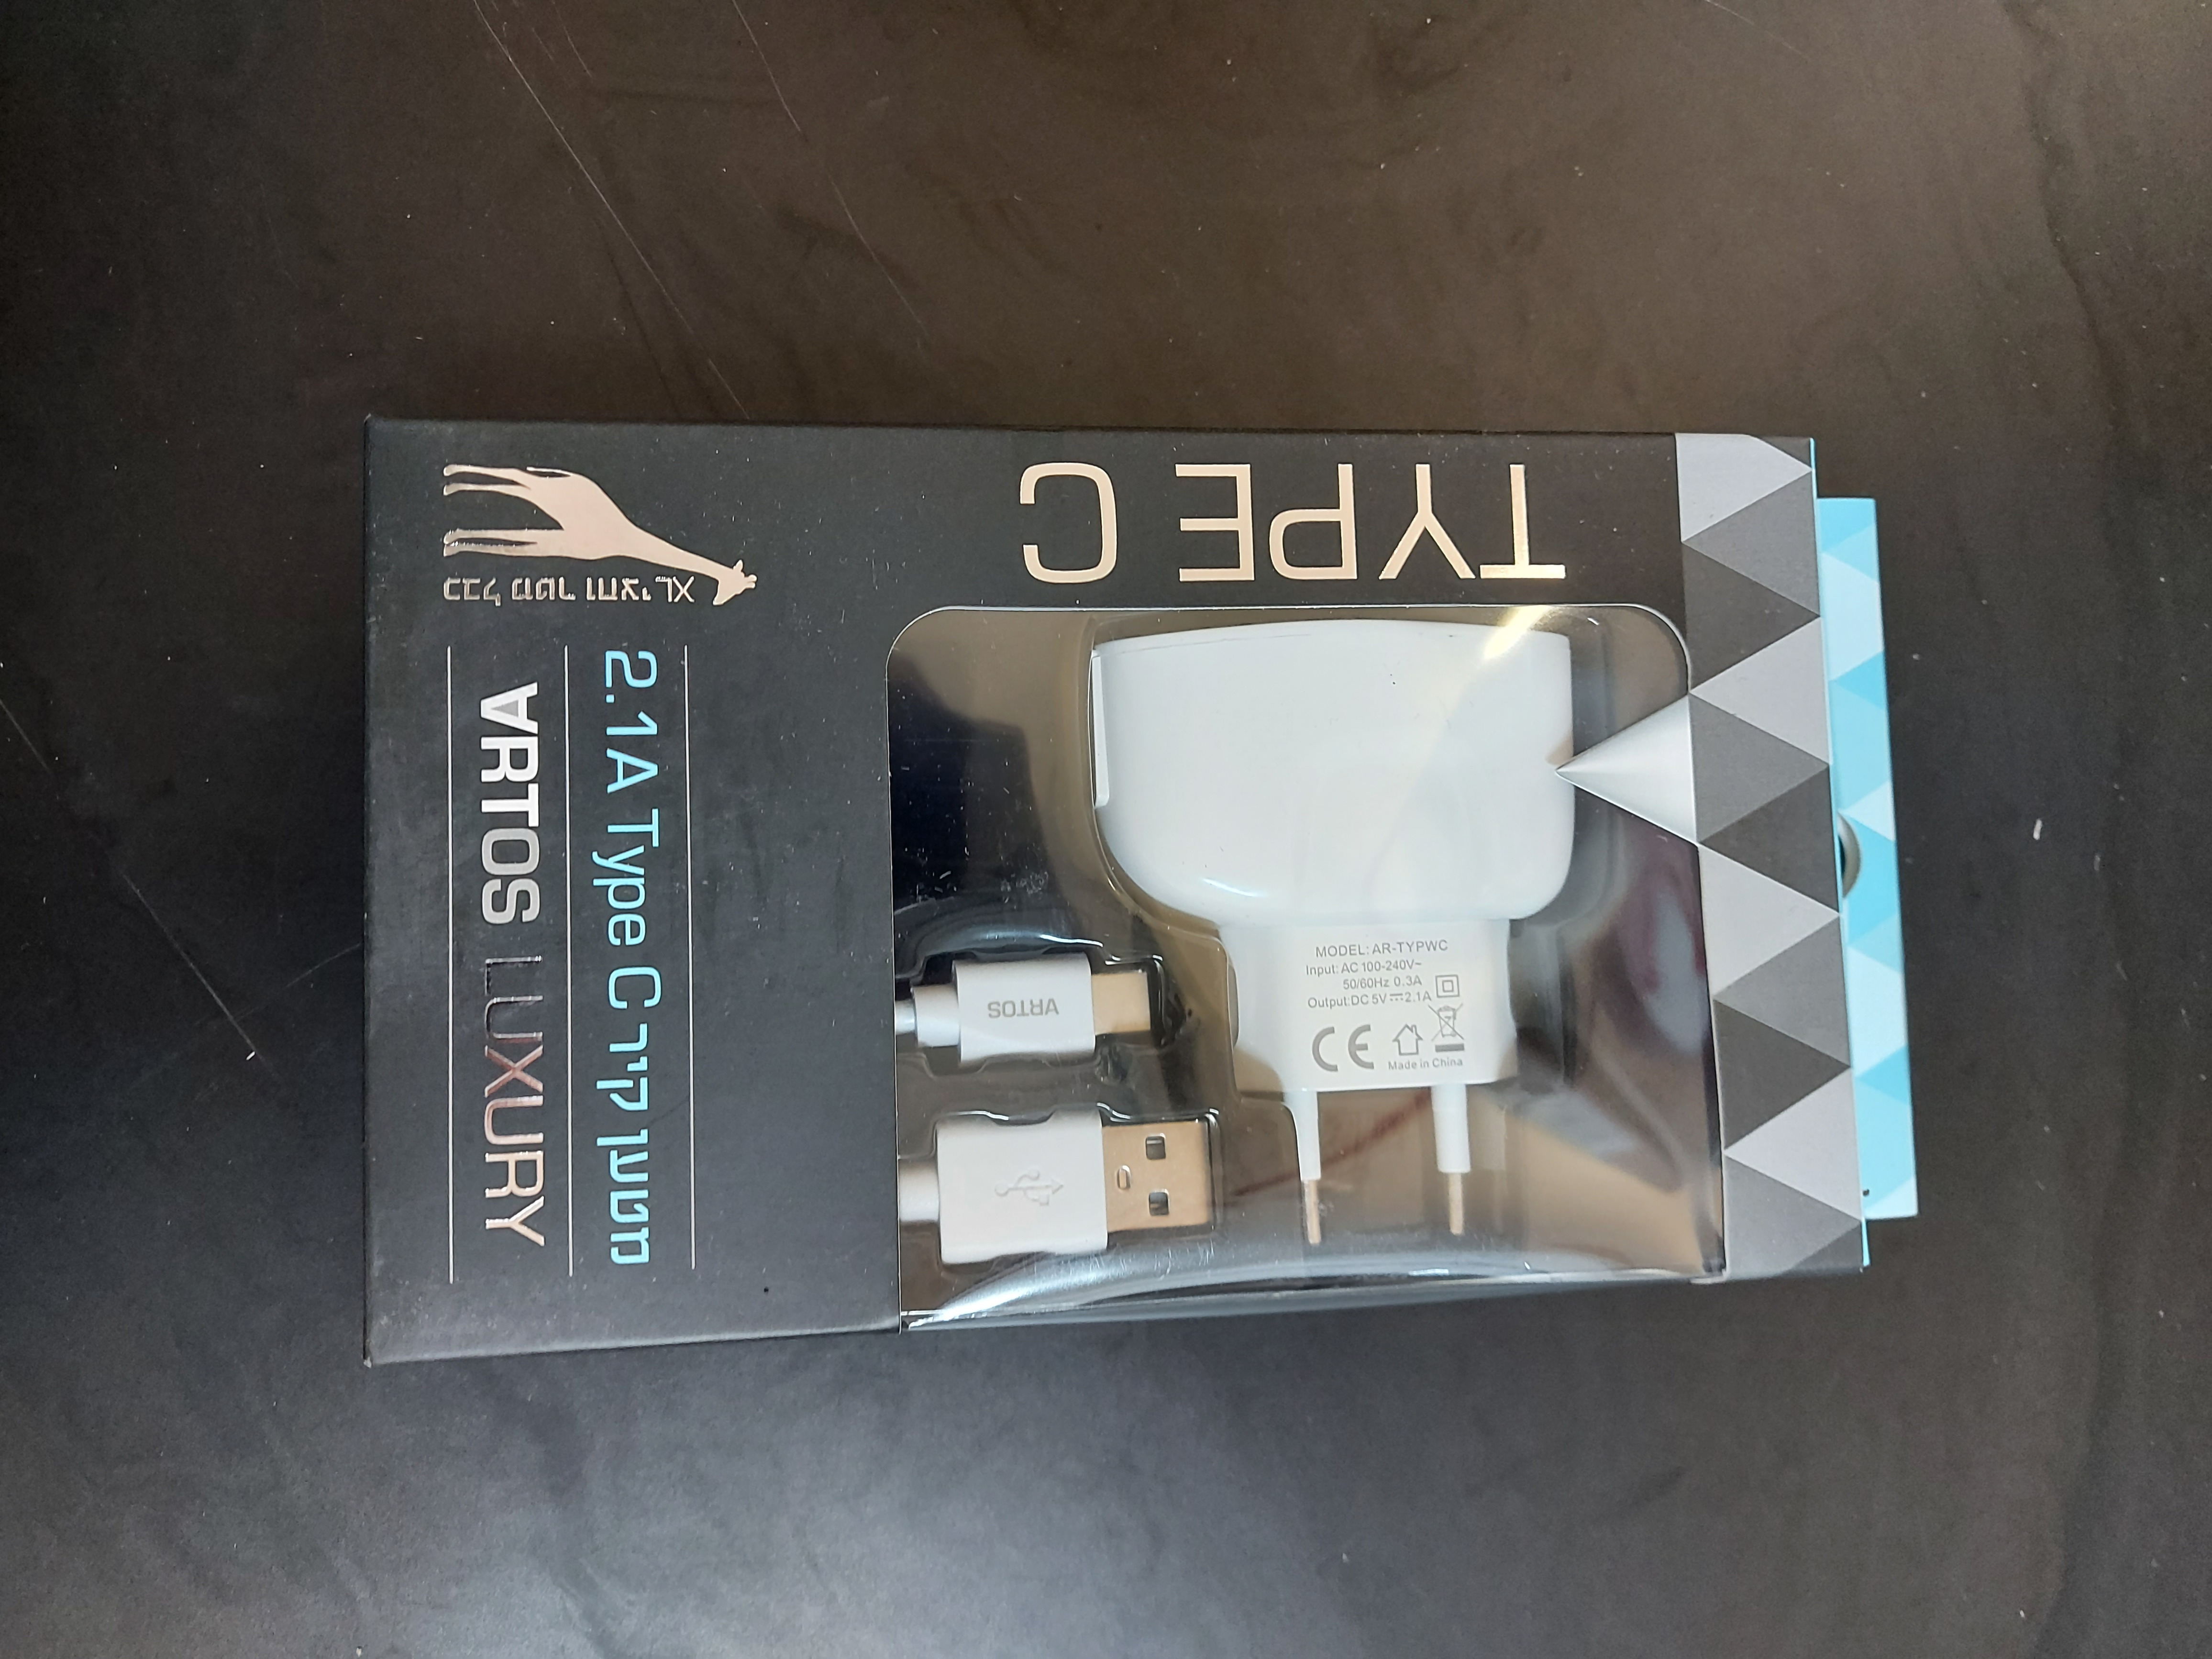 2.1A TYPE C WALL CHARGER